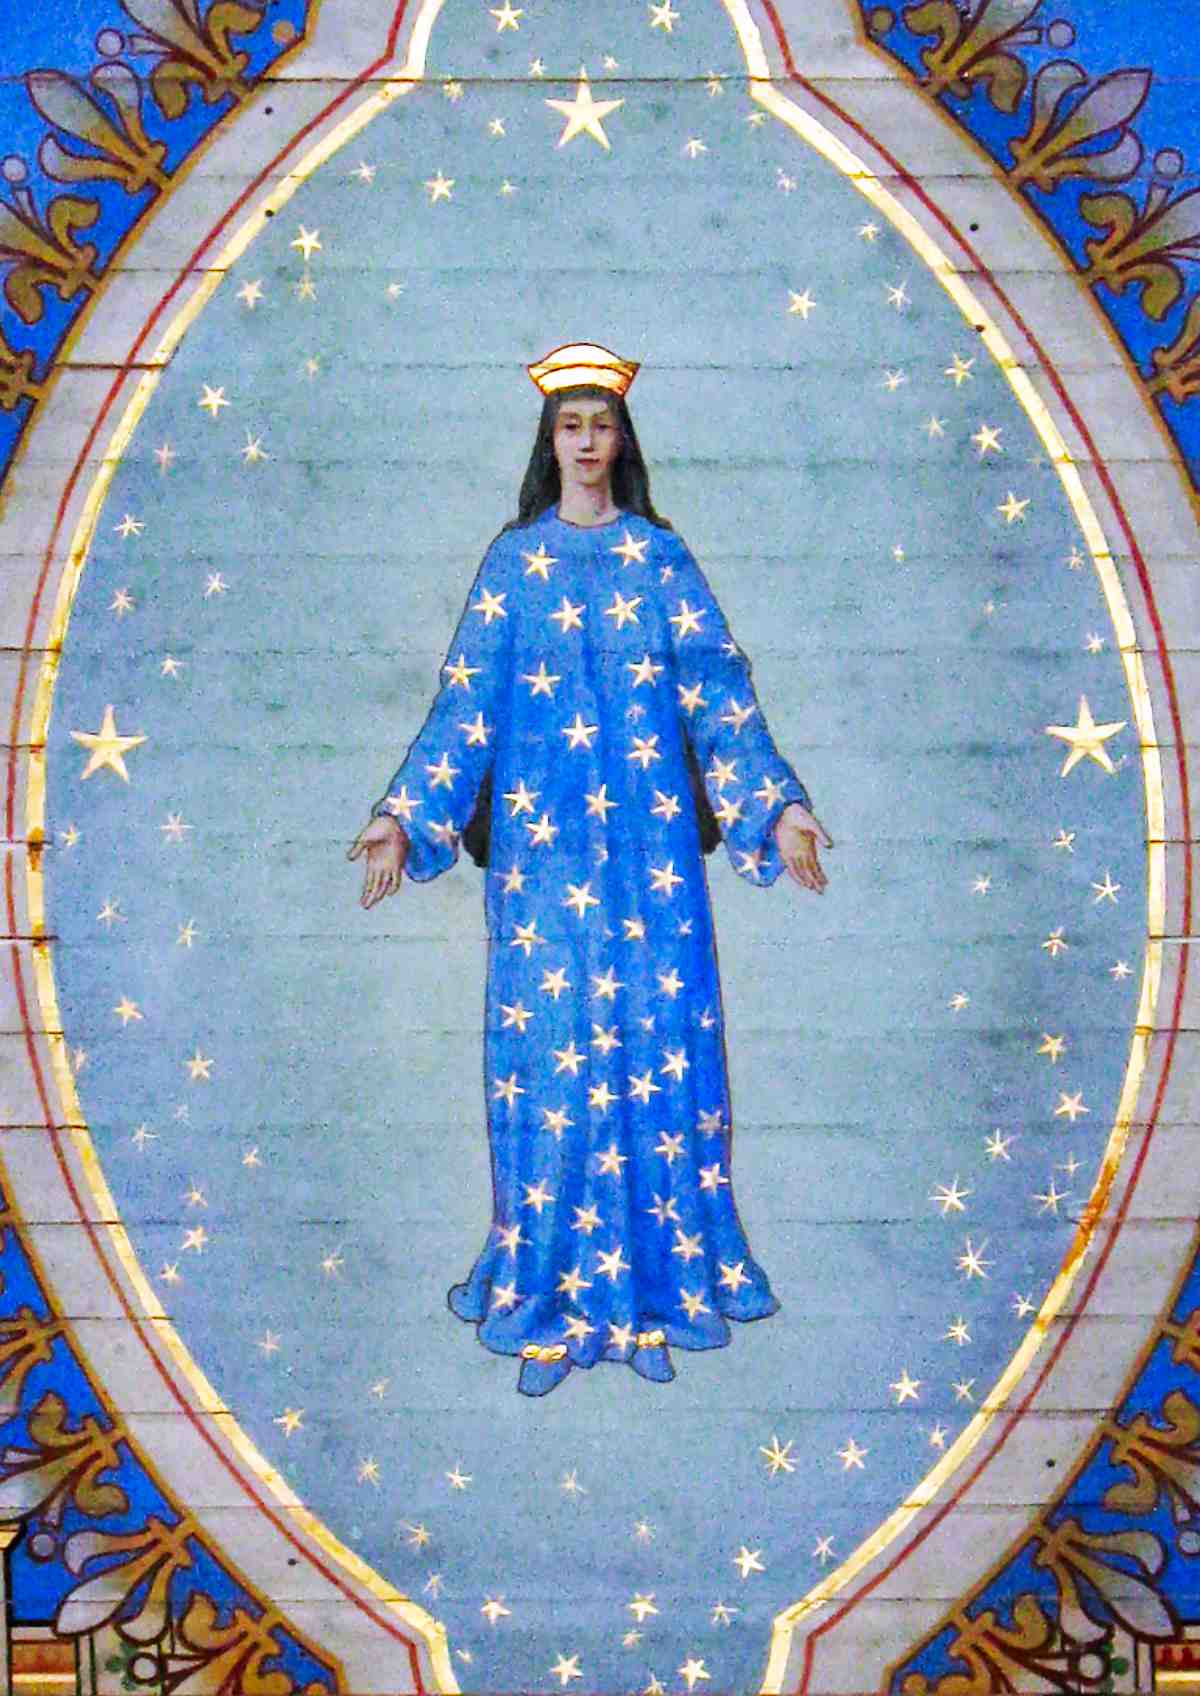 Our Lady of Pontmain, 1st Phase of Apparition